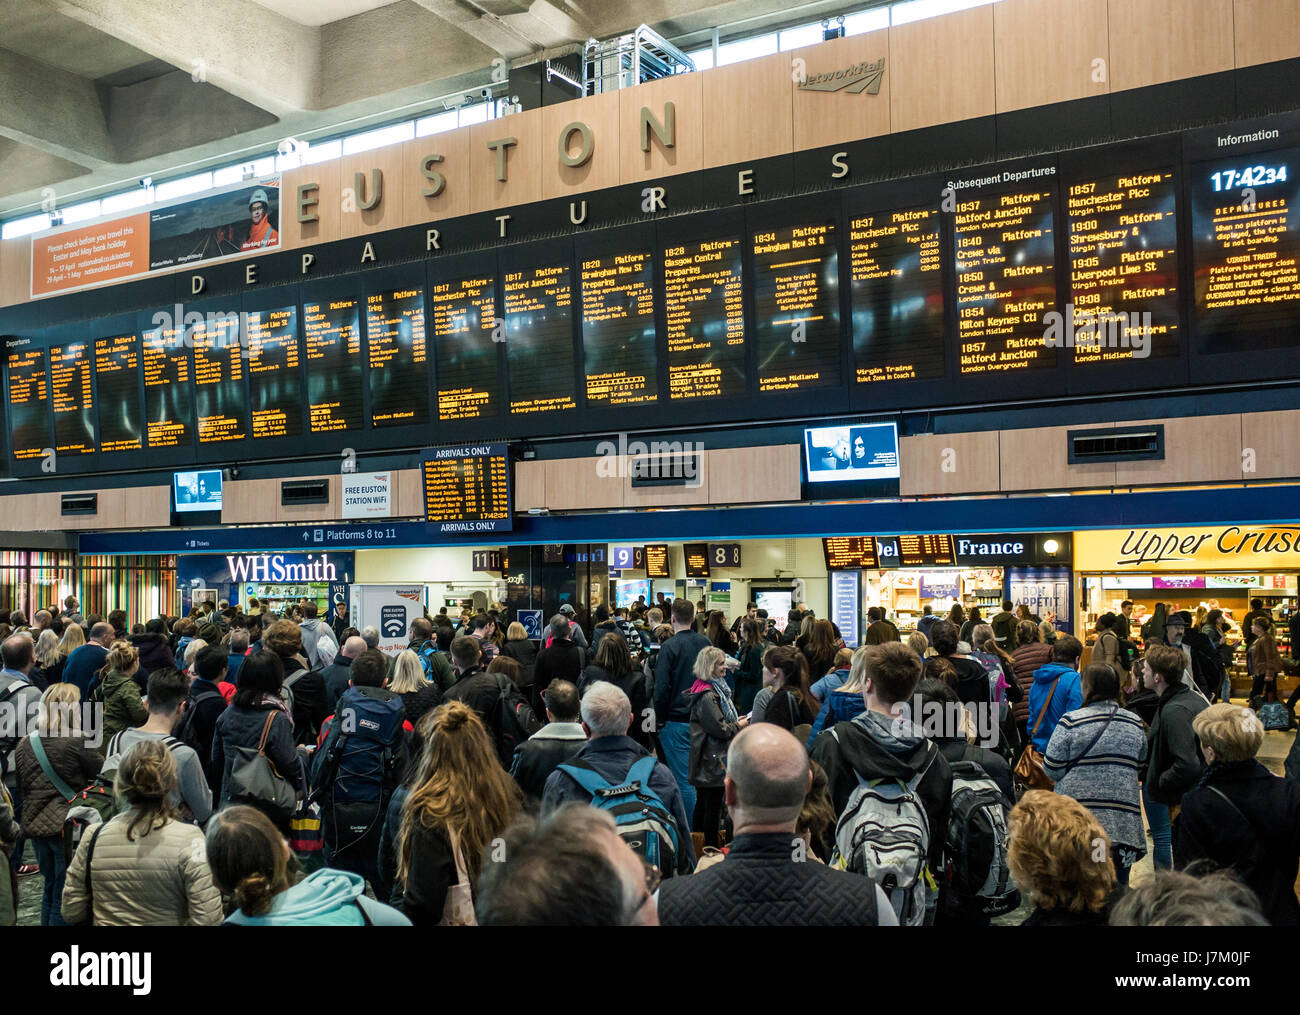 London Euston Station High Resolution Stock Photography and Images - Alamy